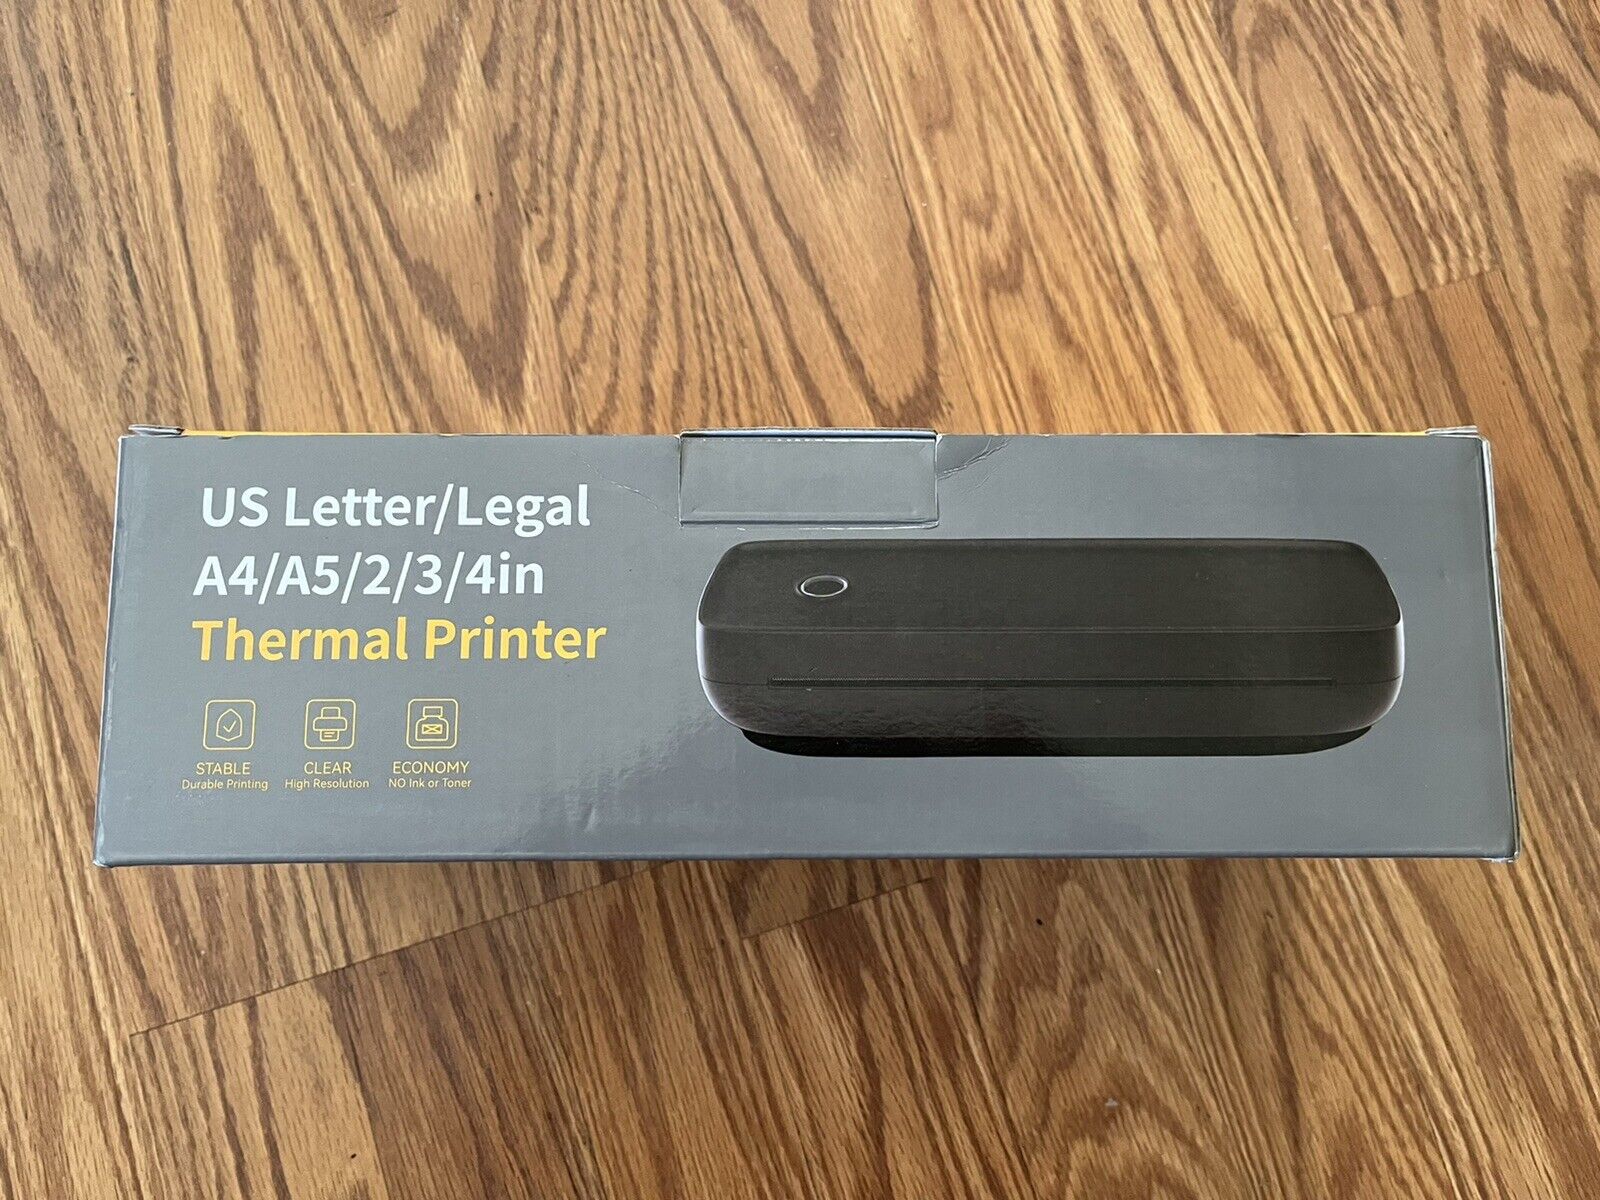 Aixiqee A80 Portable Wireless Bluetooth Thermal Printer, A4/A5/2/3/4in